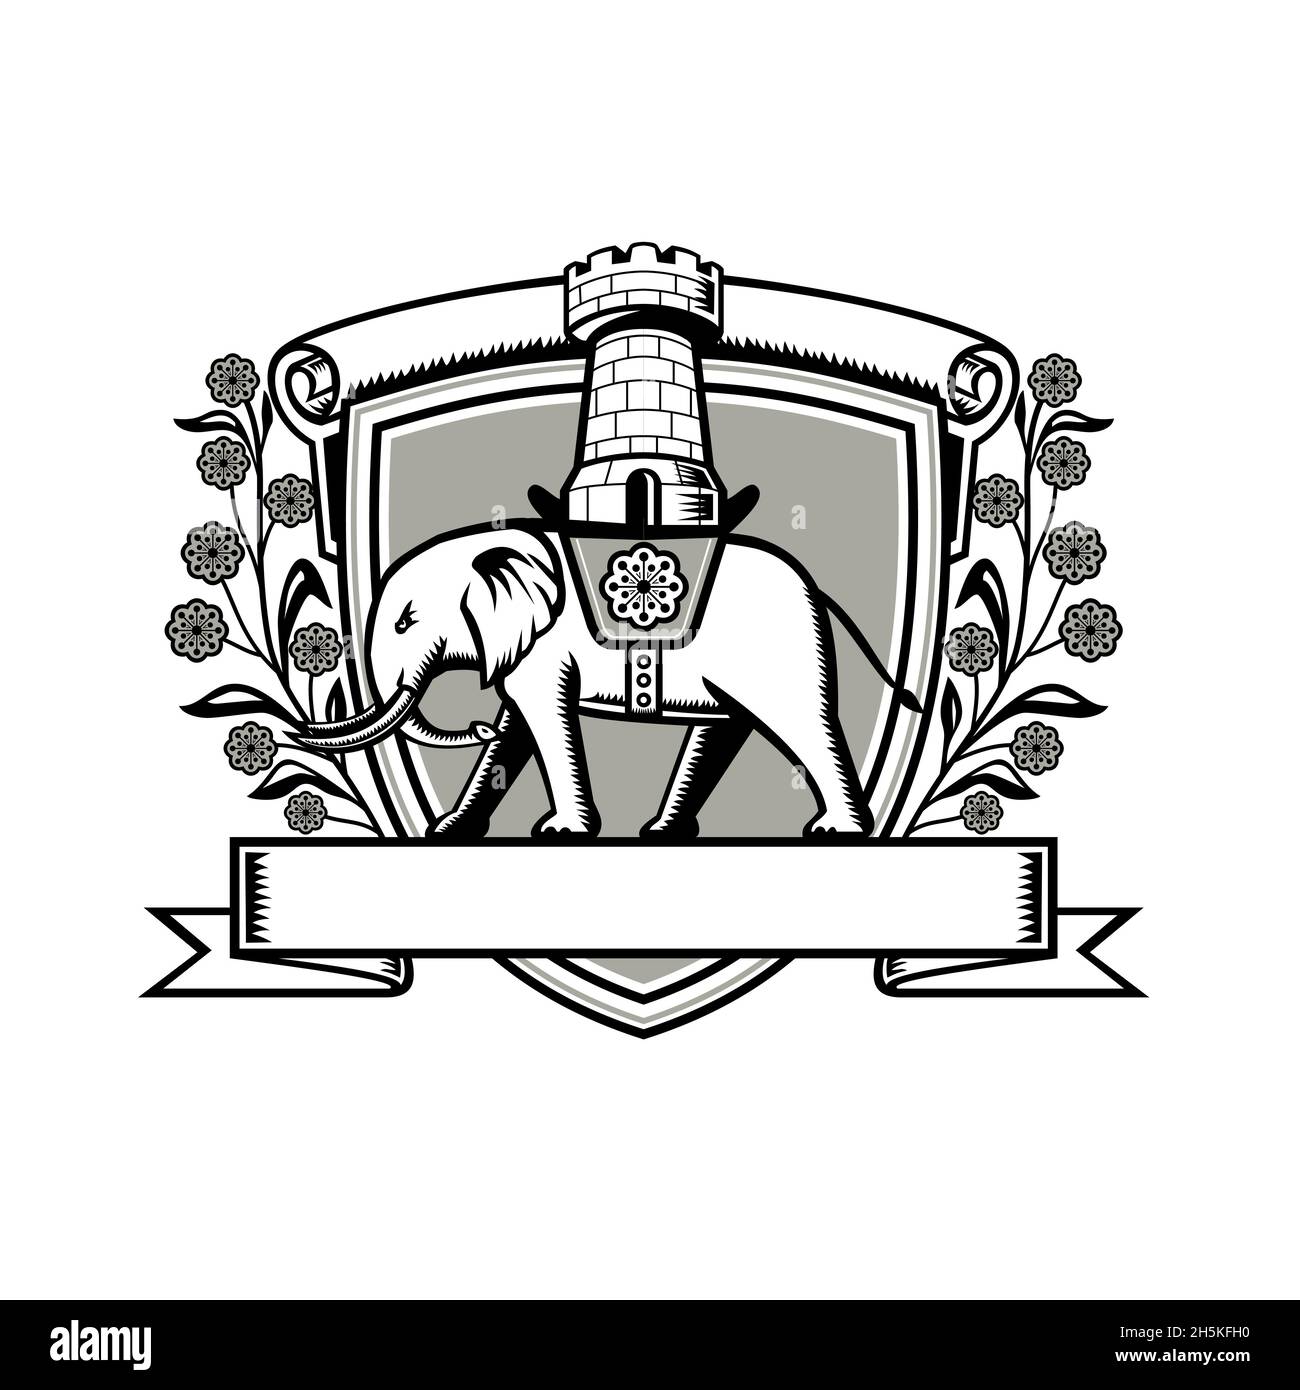 Coat of Arms with Elephant Wearing Saddle with Castle Tower and Wattle Flower Retro Woodcut Style Stock Photo